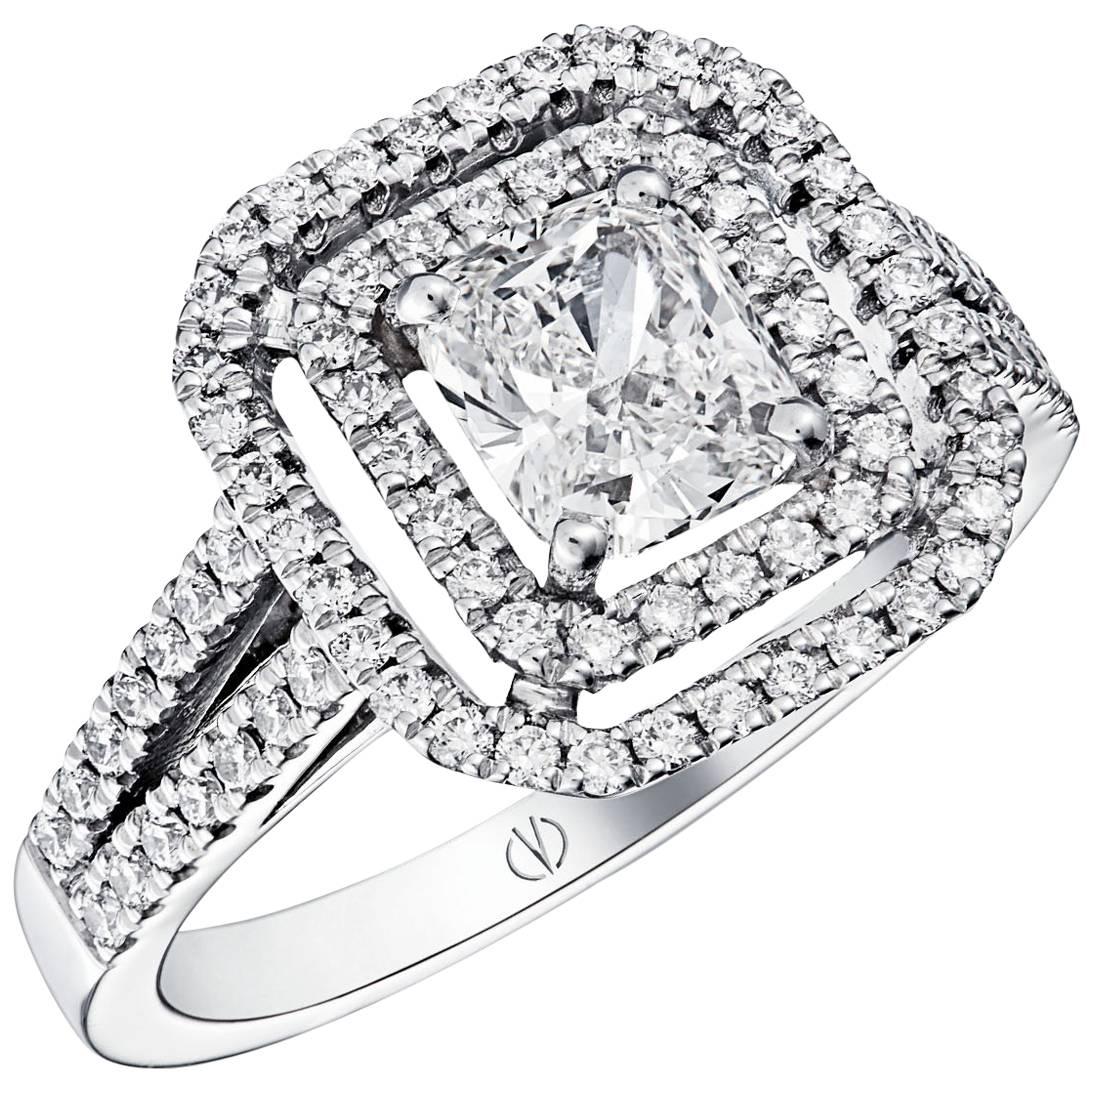 Clarence 0.90 Carat F VS2 Diamond Ring For Sale